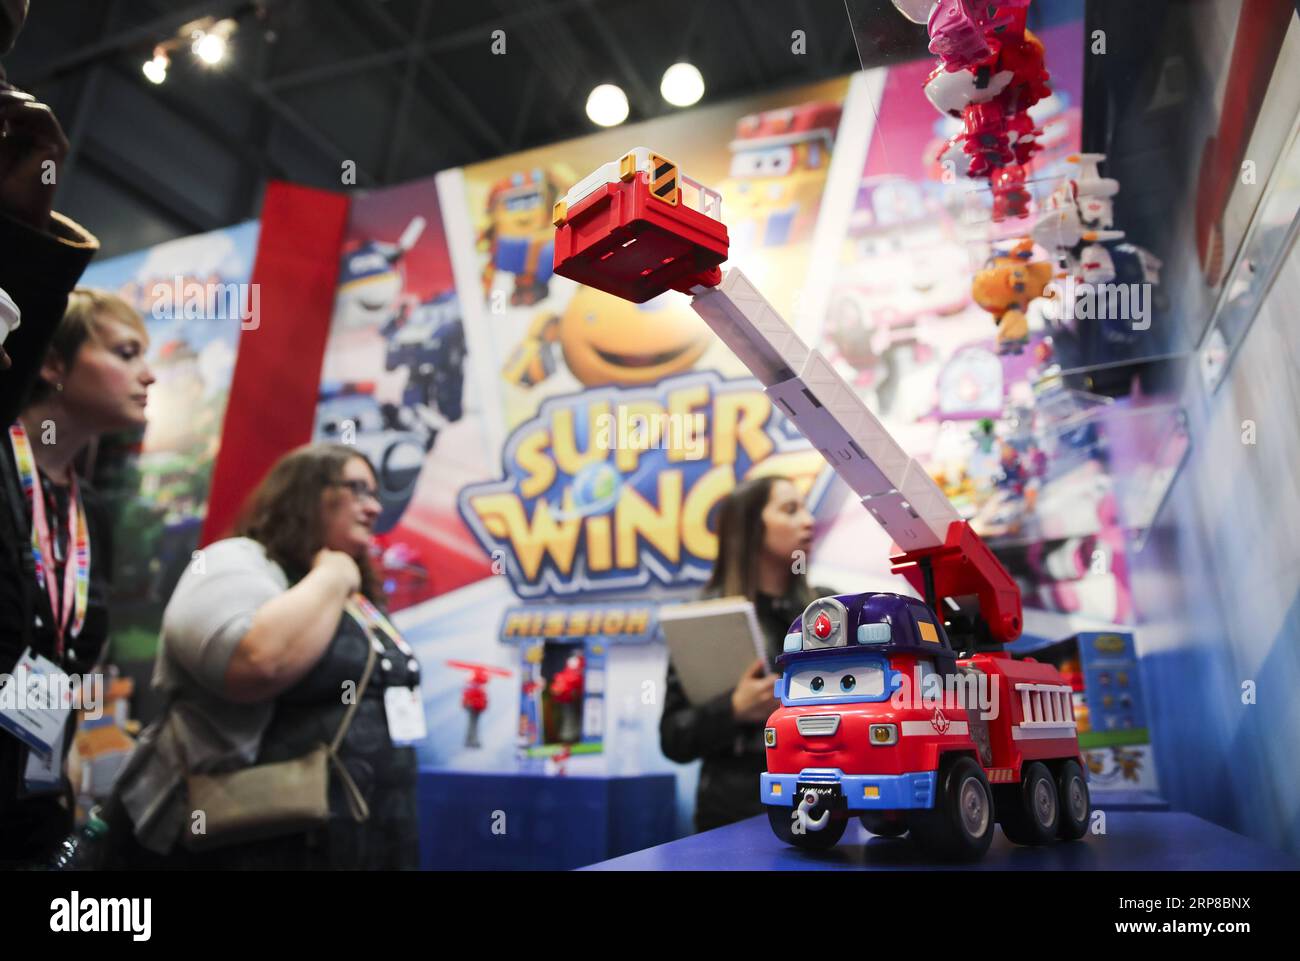 (190226) -- BEIJING, Feb. 26, 2019 -- Visitors look at toy products of Super Wings at the booth of Alpha Group Co., Ltd., a major animation, toy and entertainment player from south China s Guangdong Province, during the 116th Annual North American International Toy Fair at the Jacob K. Javits Convention Center in New York, the United States, on Feb. 19, 2019. ) Xinhua headlines: More fun toys, no painful tariffs: American toymakers hopeful on U.S.-China trade deal WangxYing PUBLICATIONxNOTxINxCHN Stock Photo